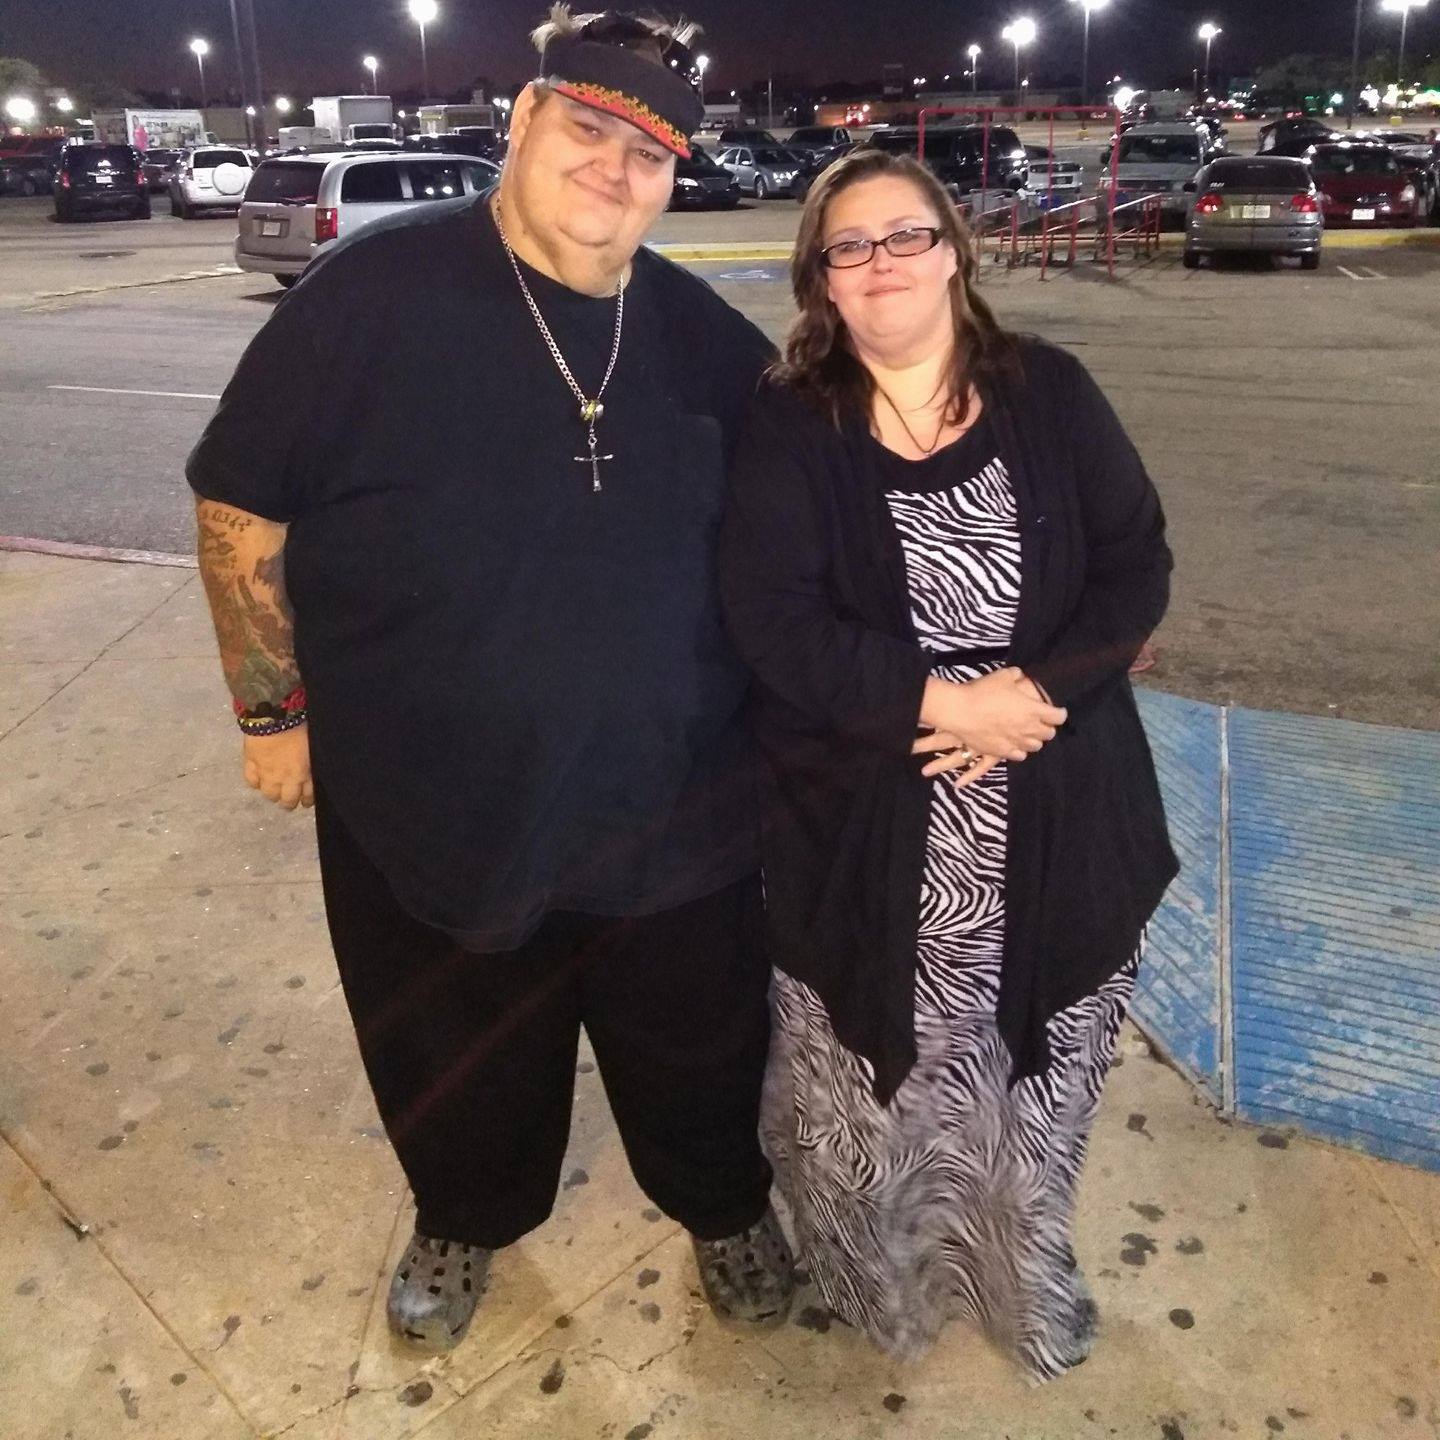 ‘My 600Lb Life’ Stars Lee and Rena Are Getting Married Woman's World